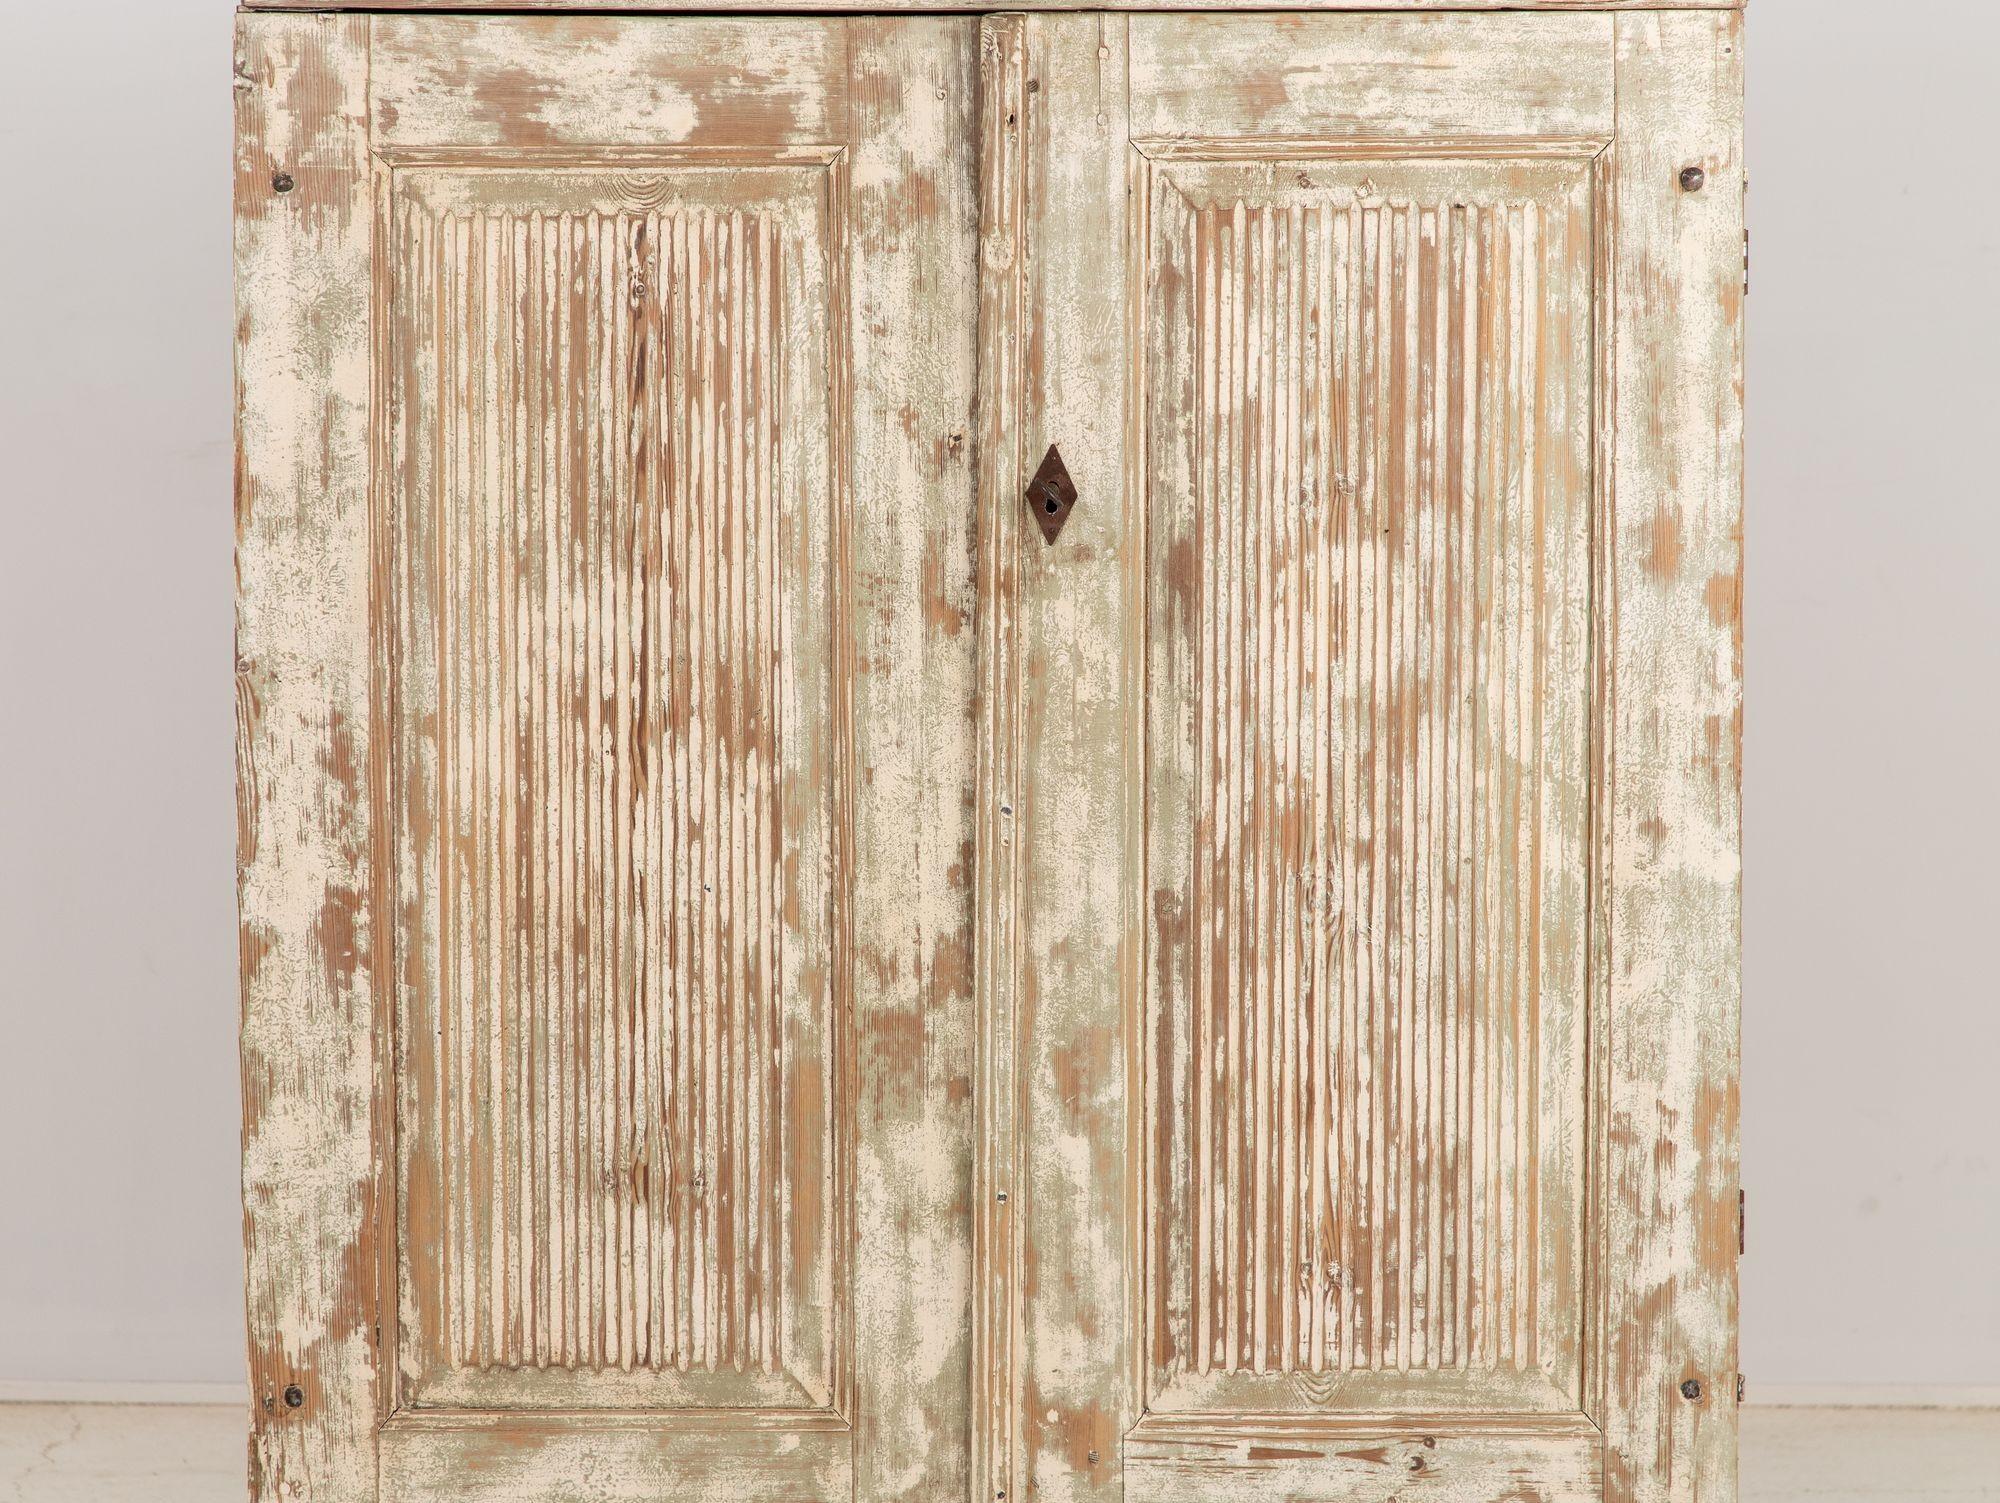 Immerse yourself in the timeless elegance of late 19th Century Swedish Gustavian style with this exquisite cabinet. Crafted from painted pine wood, it exudes understated sophistication. The two reeded doors add a subtle textural dimension, while